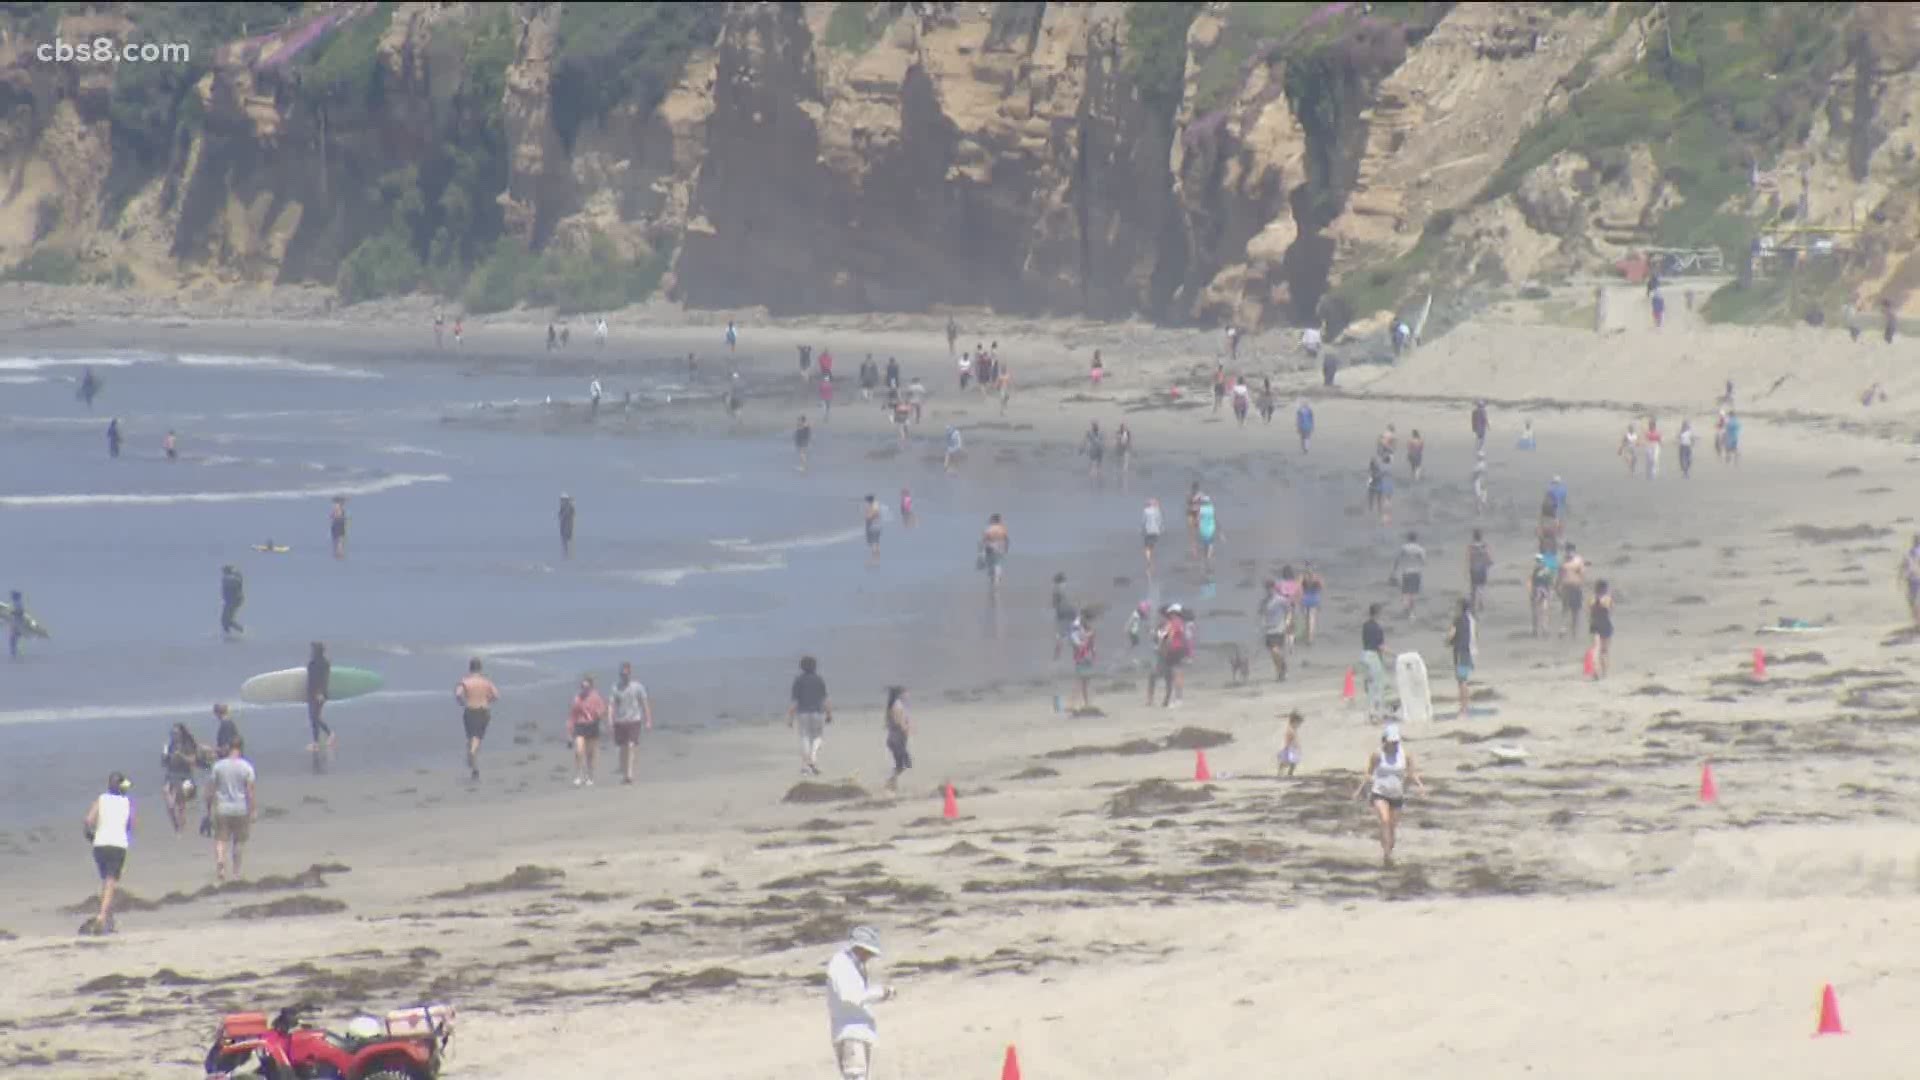 Several beaches opened at sunrise Monday, allowing surfers, swimmers, kayakers and paddleboarders in the ocean, as well as runners and walkers on the sand.